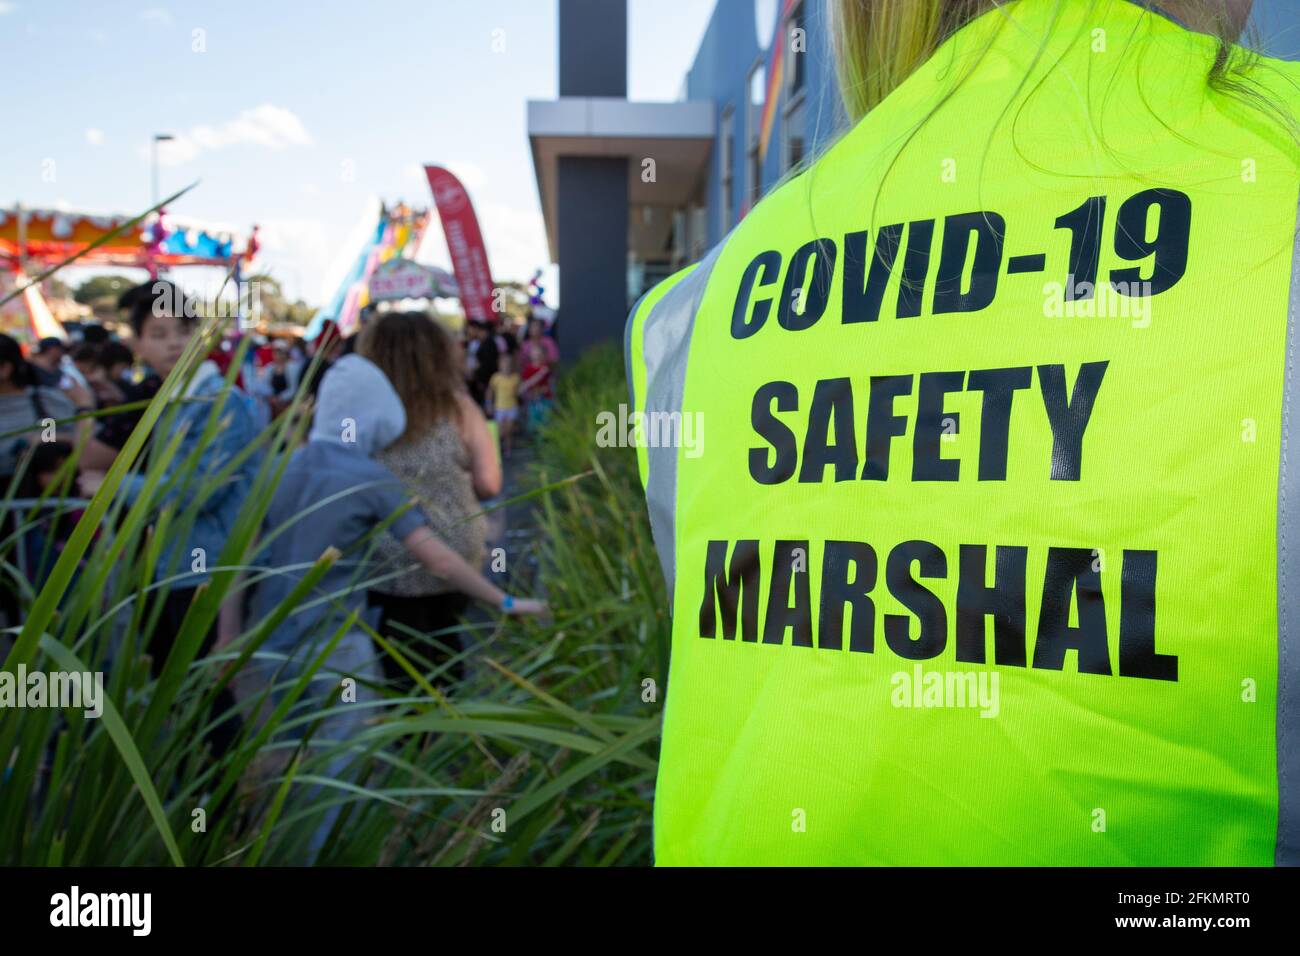 COVID 19 Safety Marshal at public event in Melbourne Australia Stock Photo